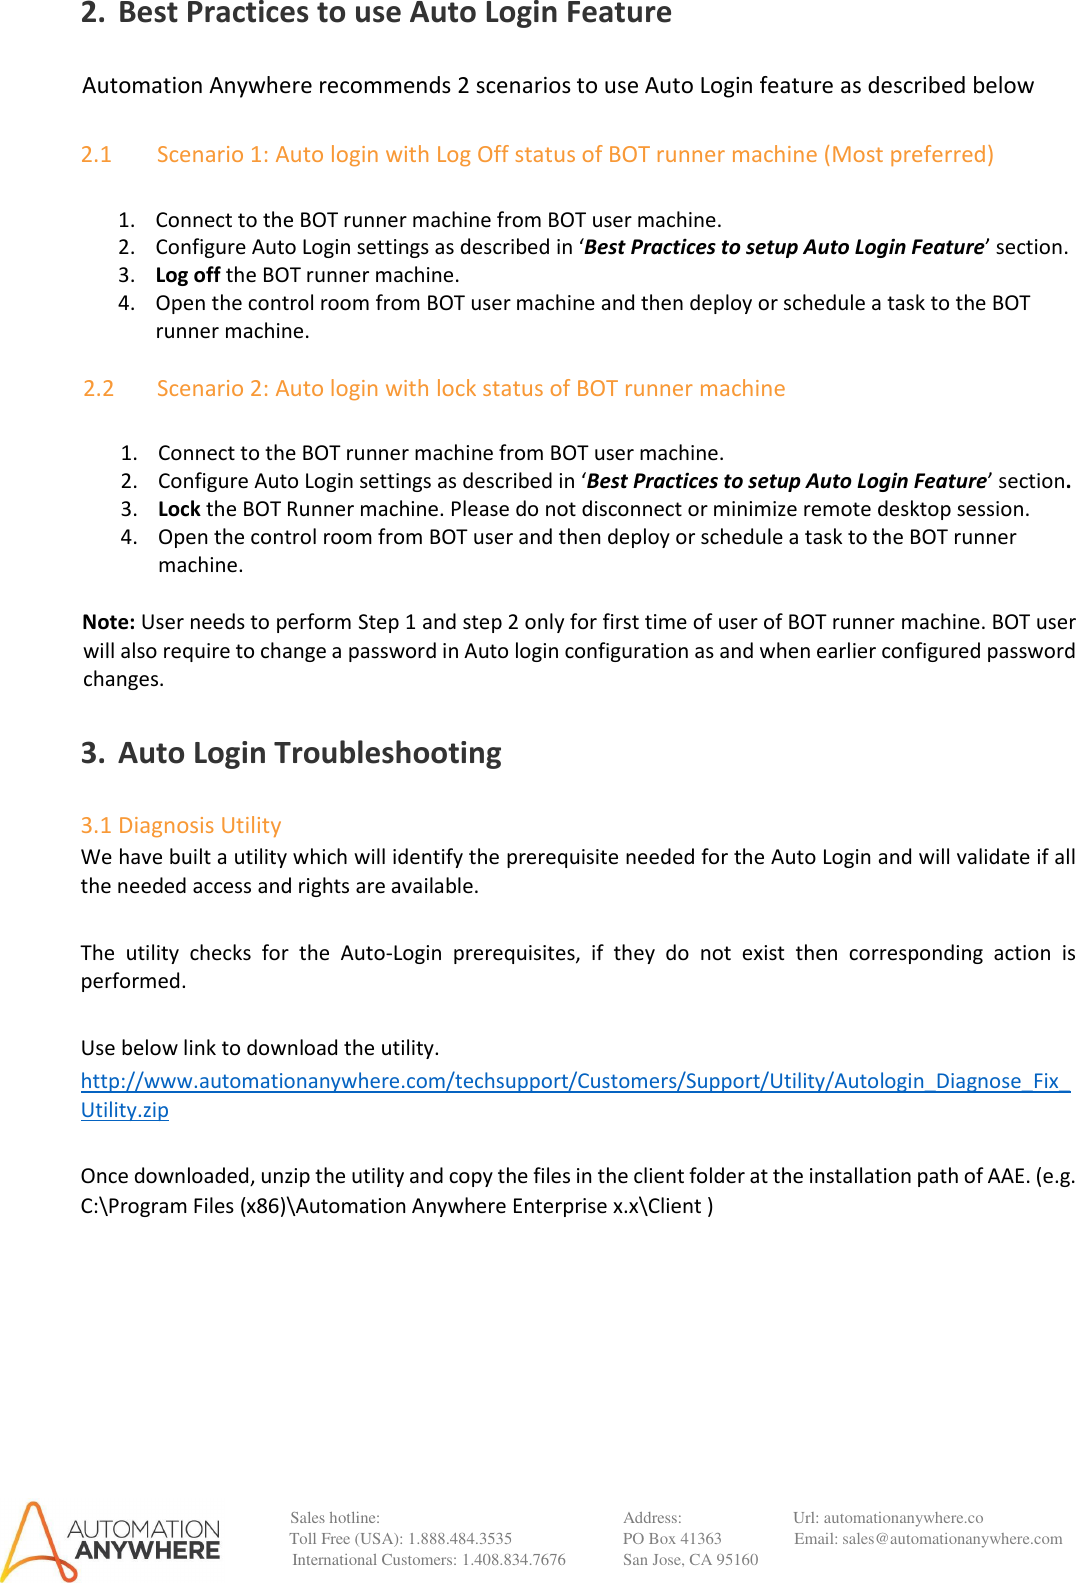 Page 6 of 11 - AAE Auto Login Best Practice Troubleshooting Guide[1]